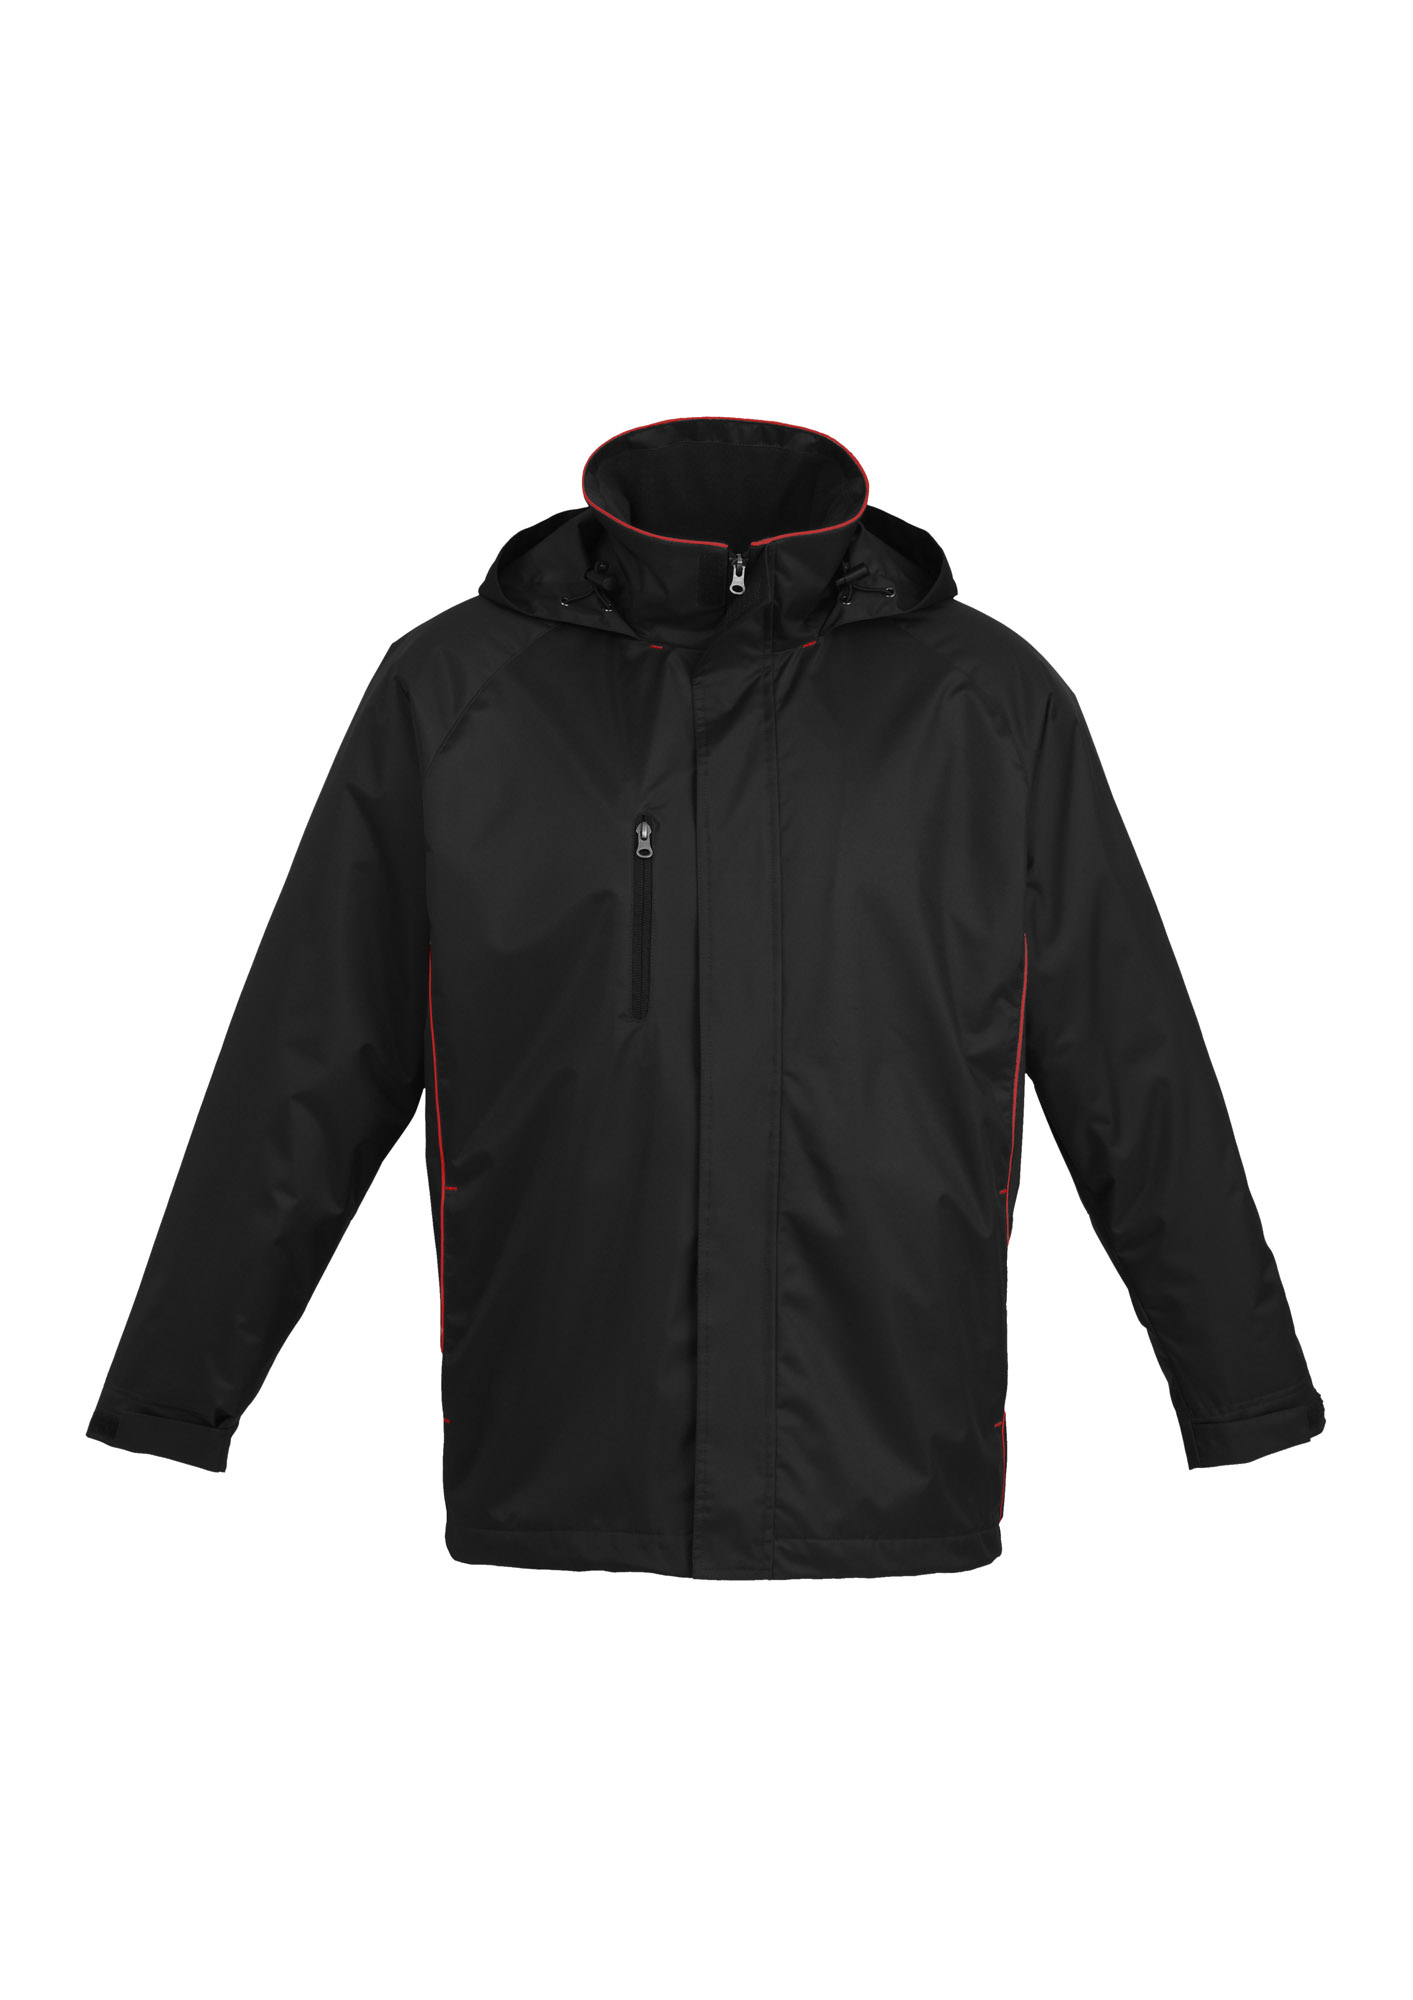 Core Weather Jacket - Black and Red - Uniform Edit